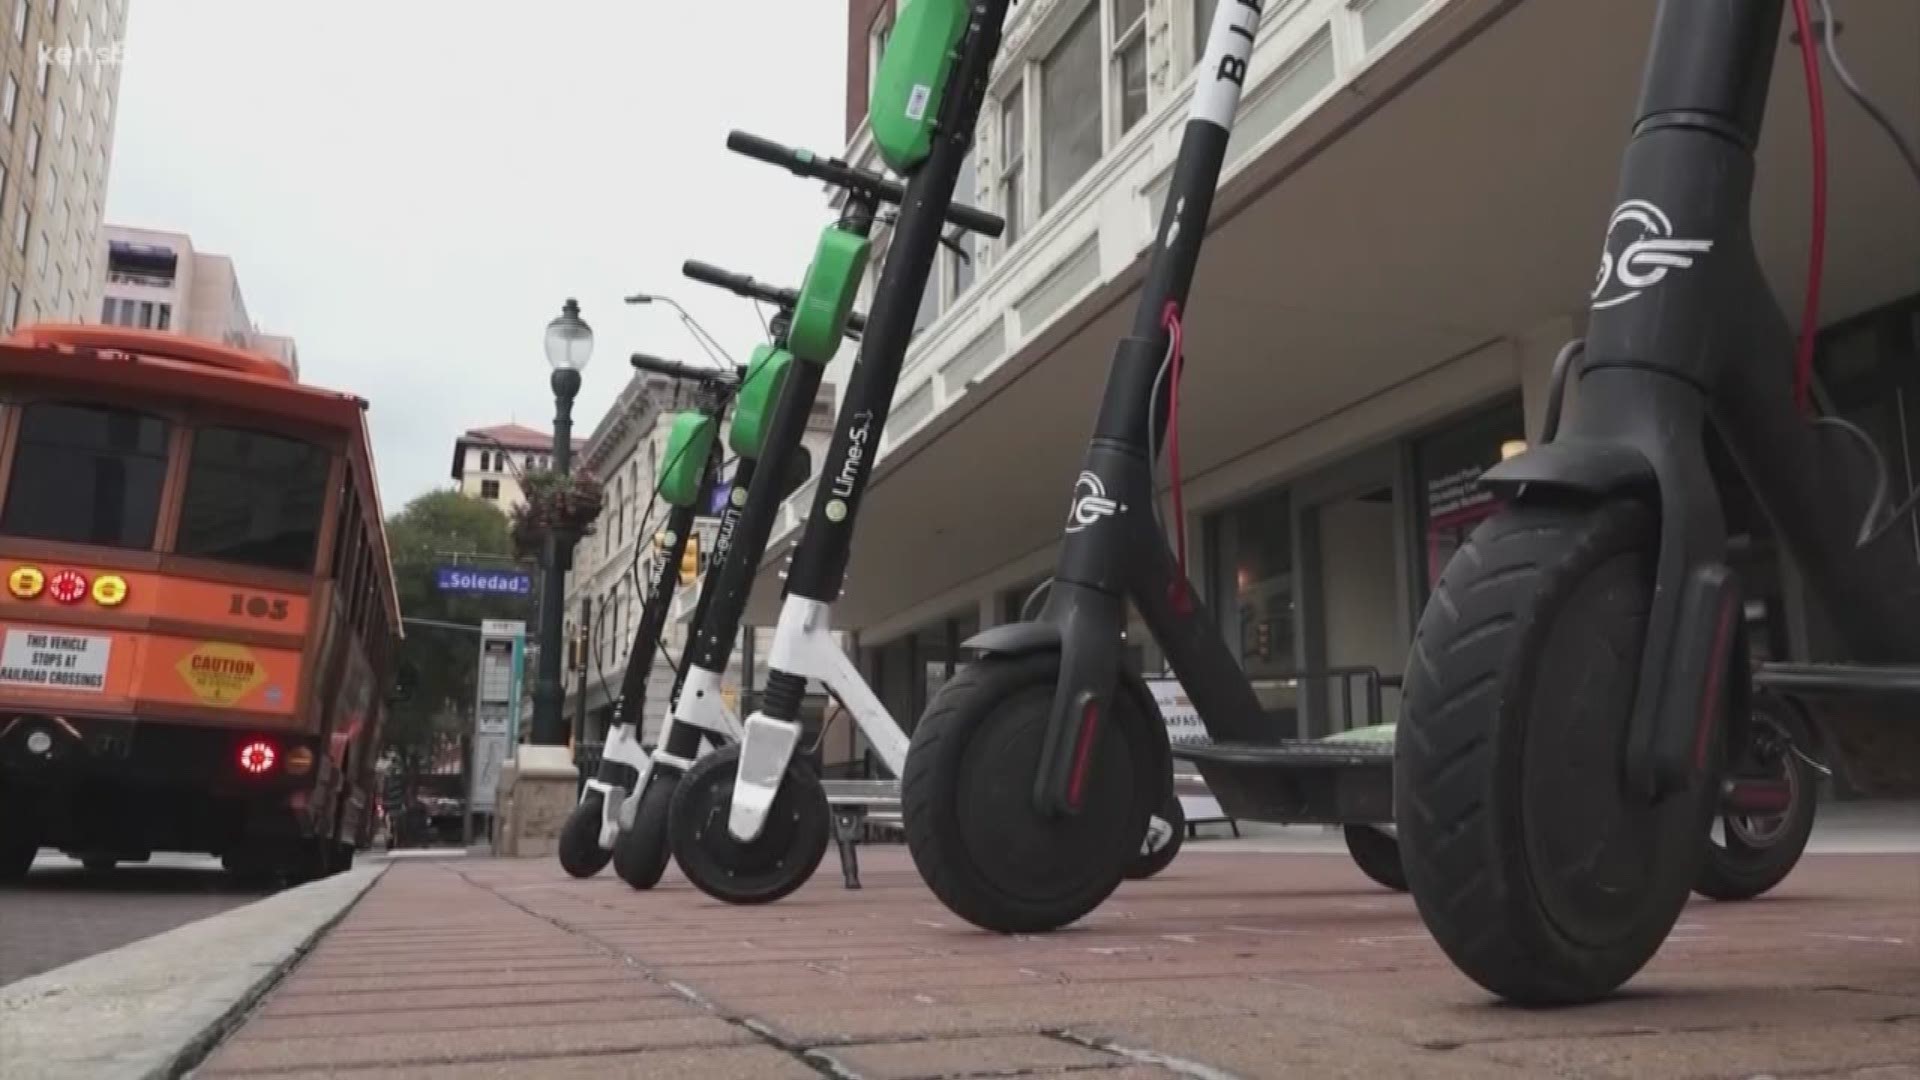 Scooter use in San Antonio is "out of control." That's how one City Council member described the electric vehicles you see everywhere at a meeting Tuesday.